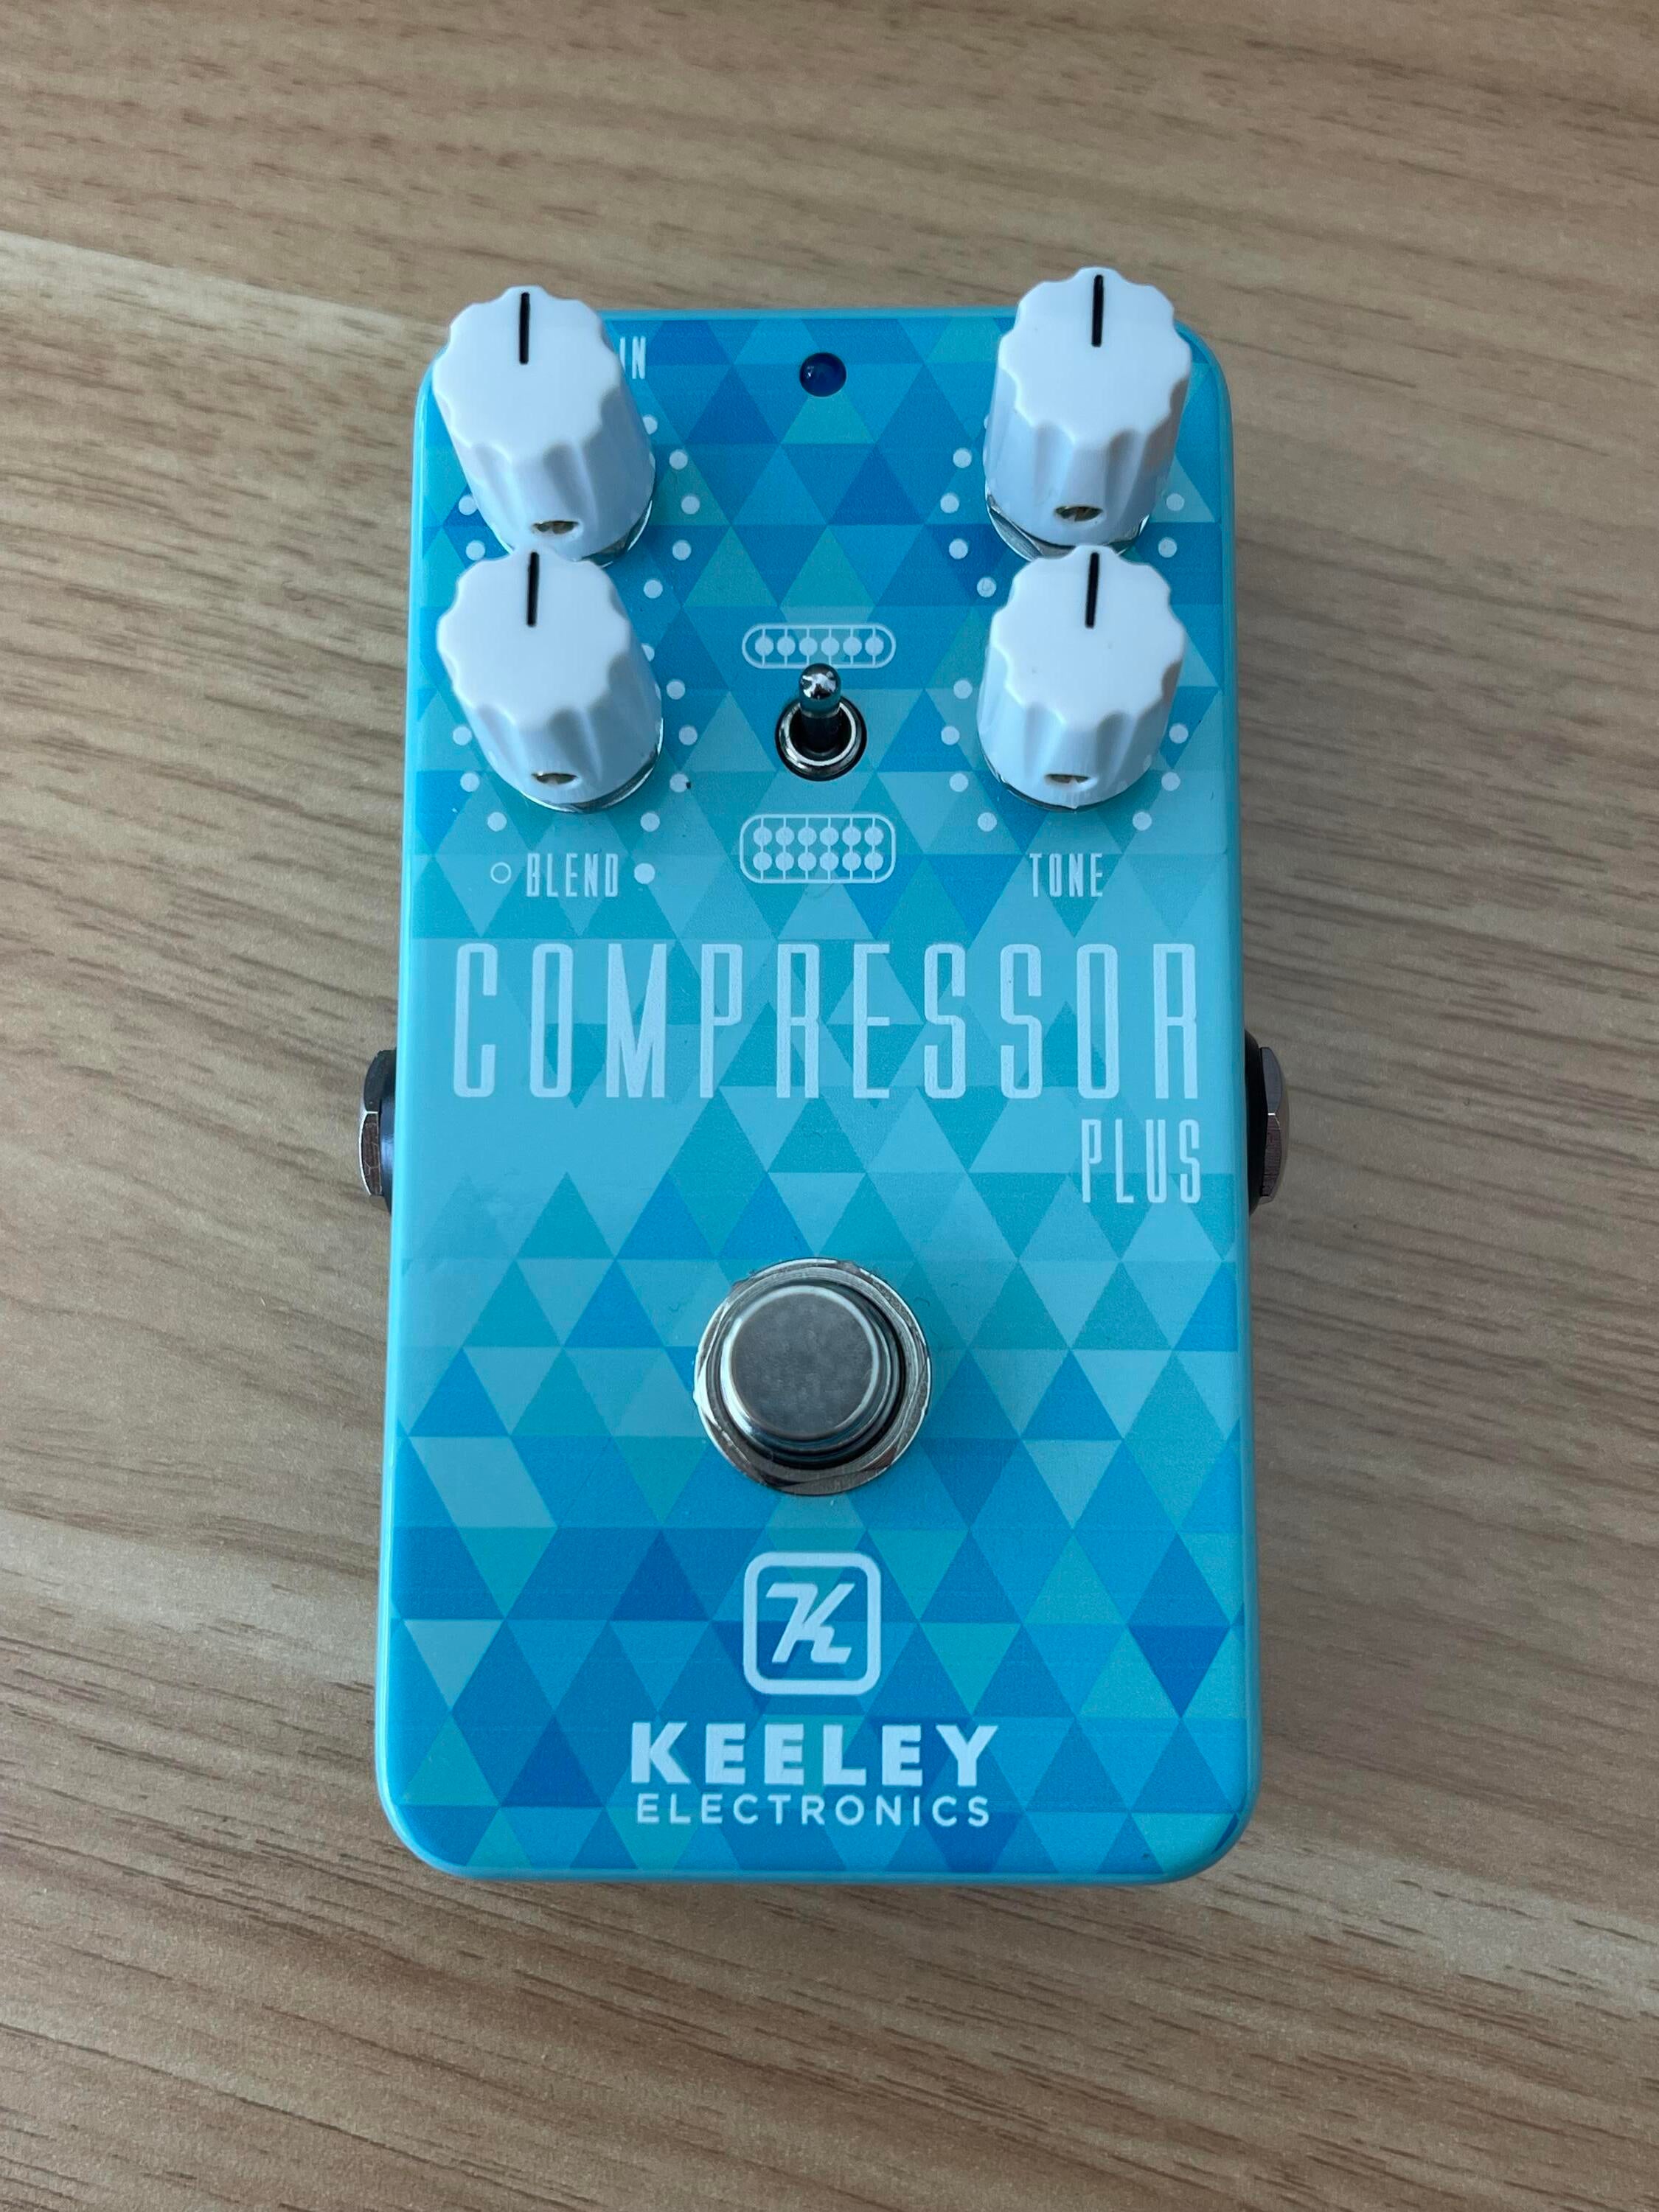 Used Keeley Compressor Plus Compressor Pedal - Sweetwater's Gear